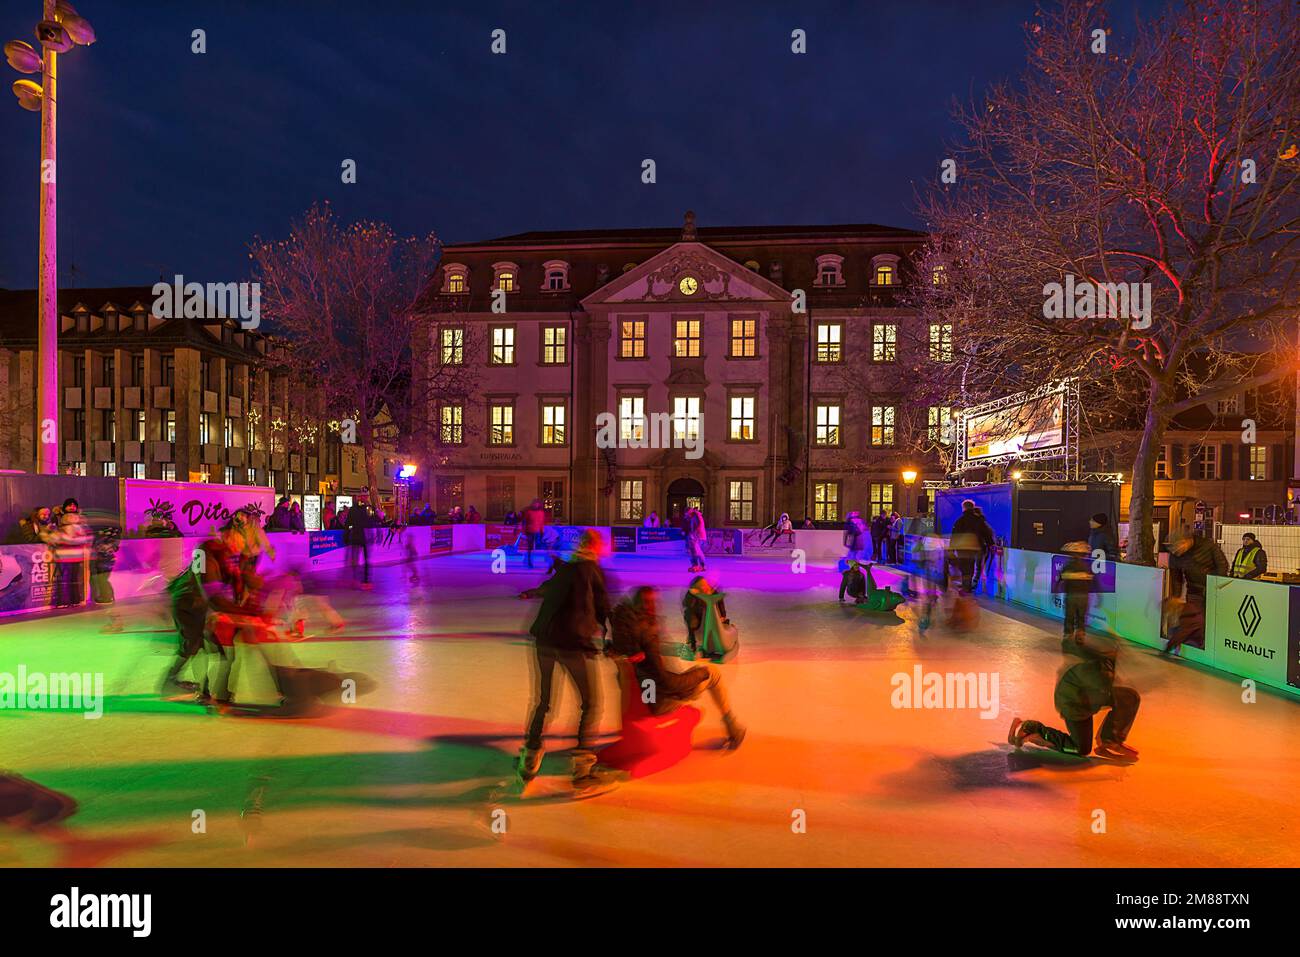 Ice skating rink in colourful evening lighting, Erlangen, Middle Franconia, Bavaria, Germany Stock Photo